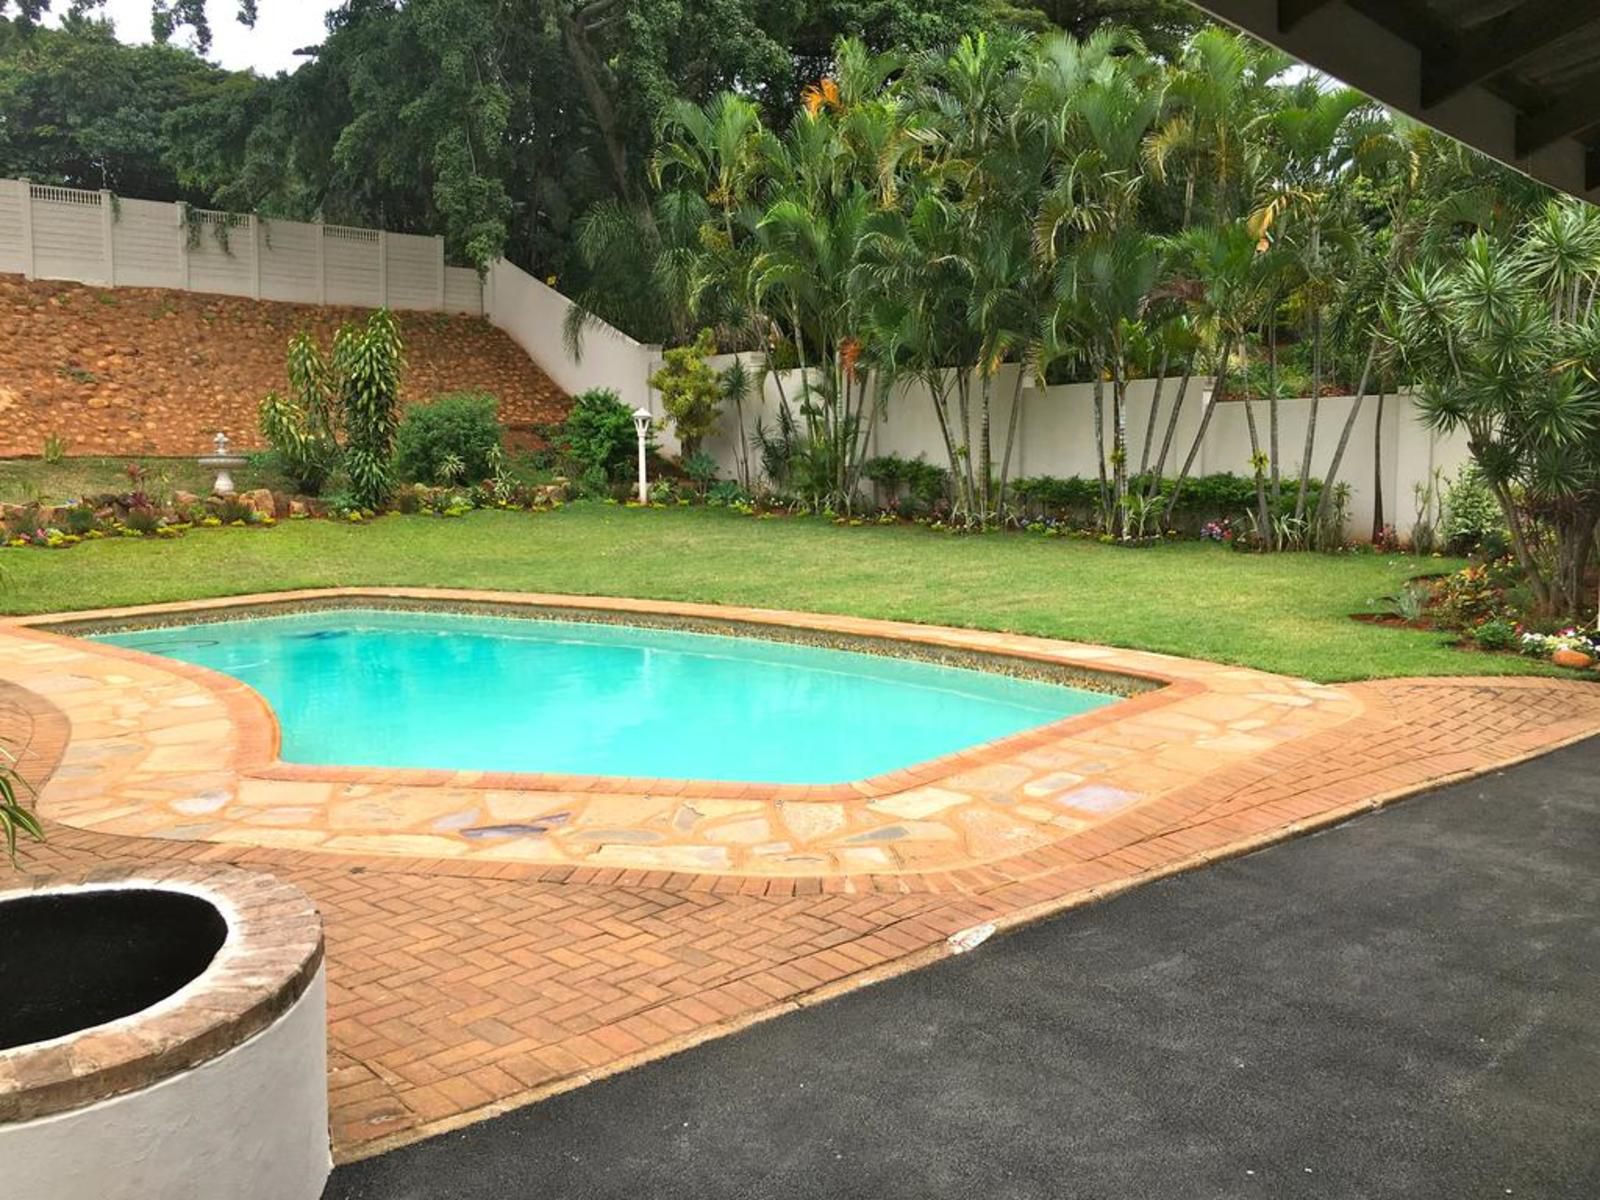 Grand Orchid Guesthouse Glen Anil Durban Kwazulu Natal South Africa Palm Tree, Plant, Nature, Wood, Garden, Swimming Pool